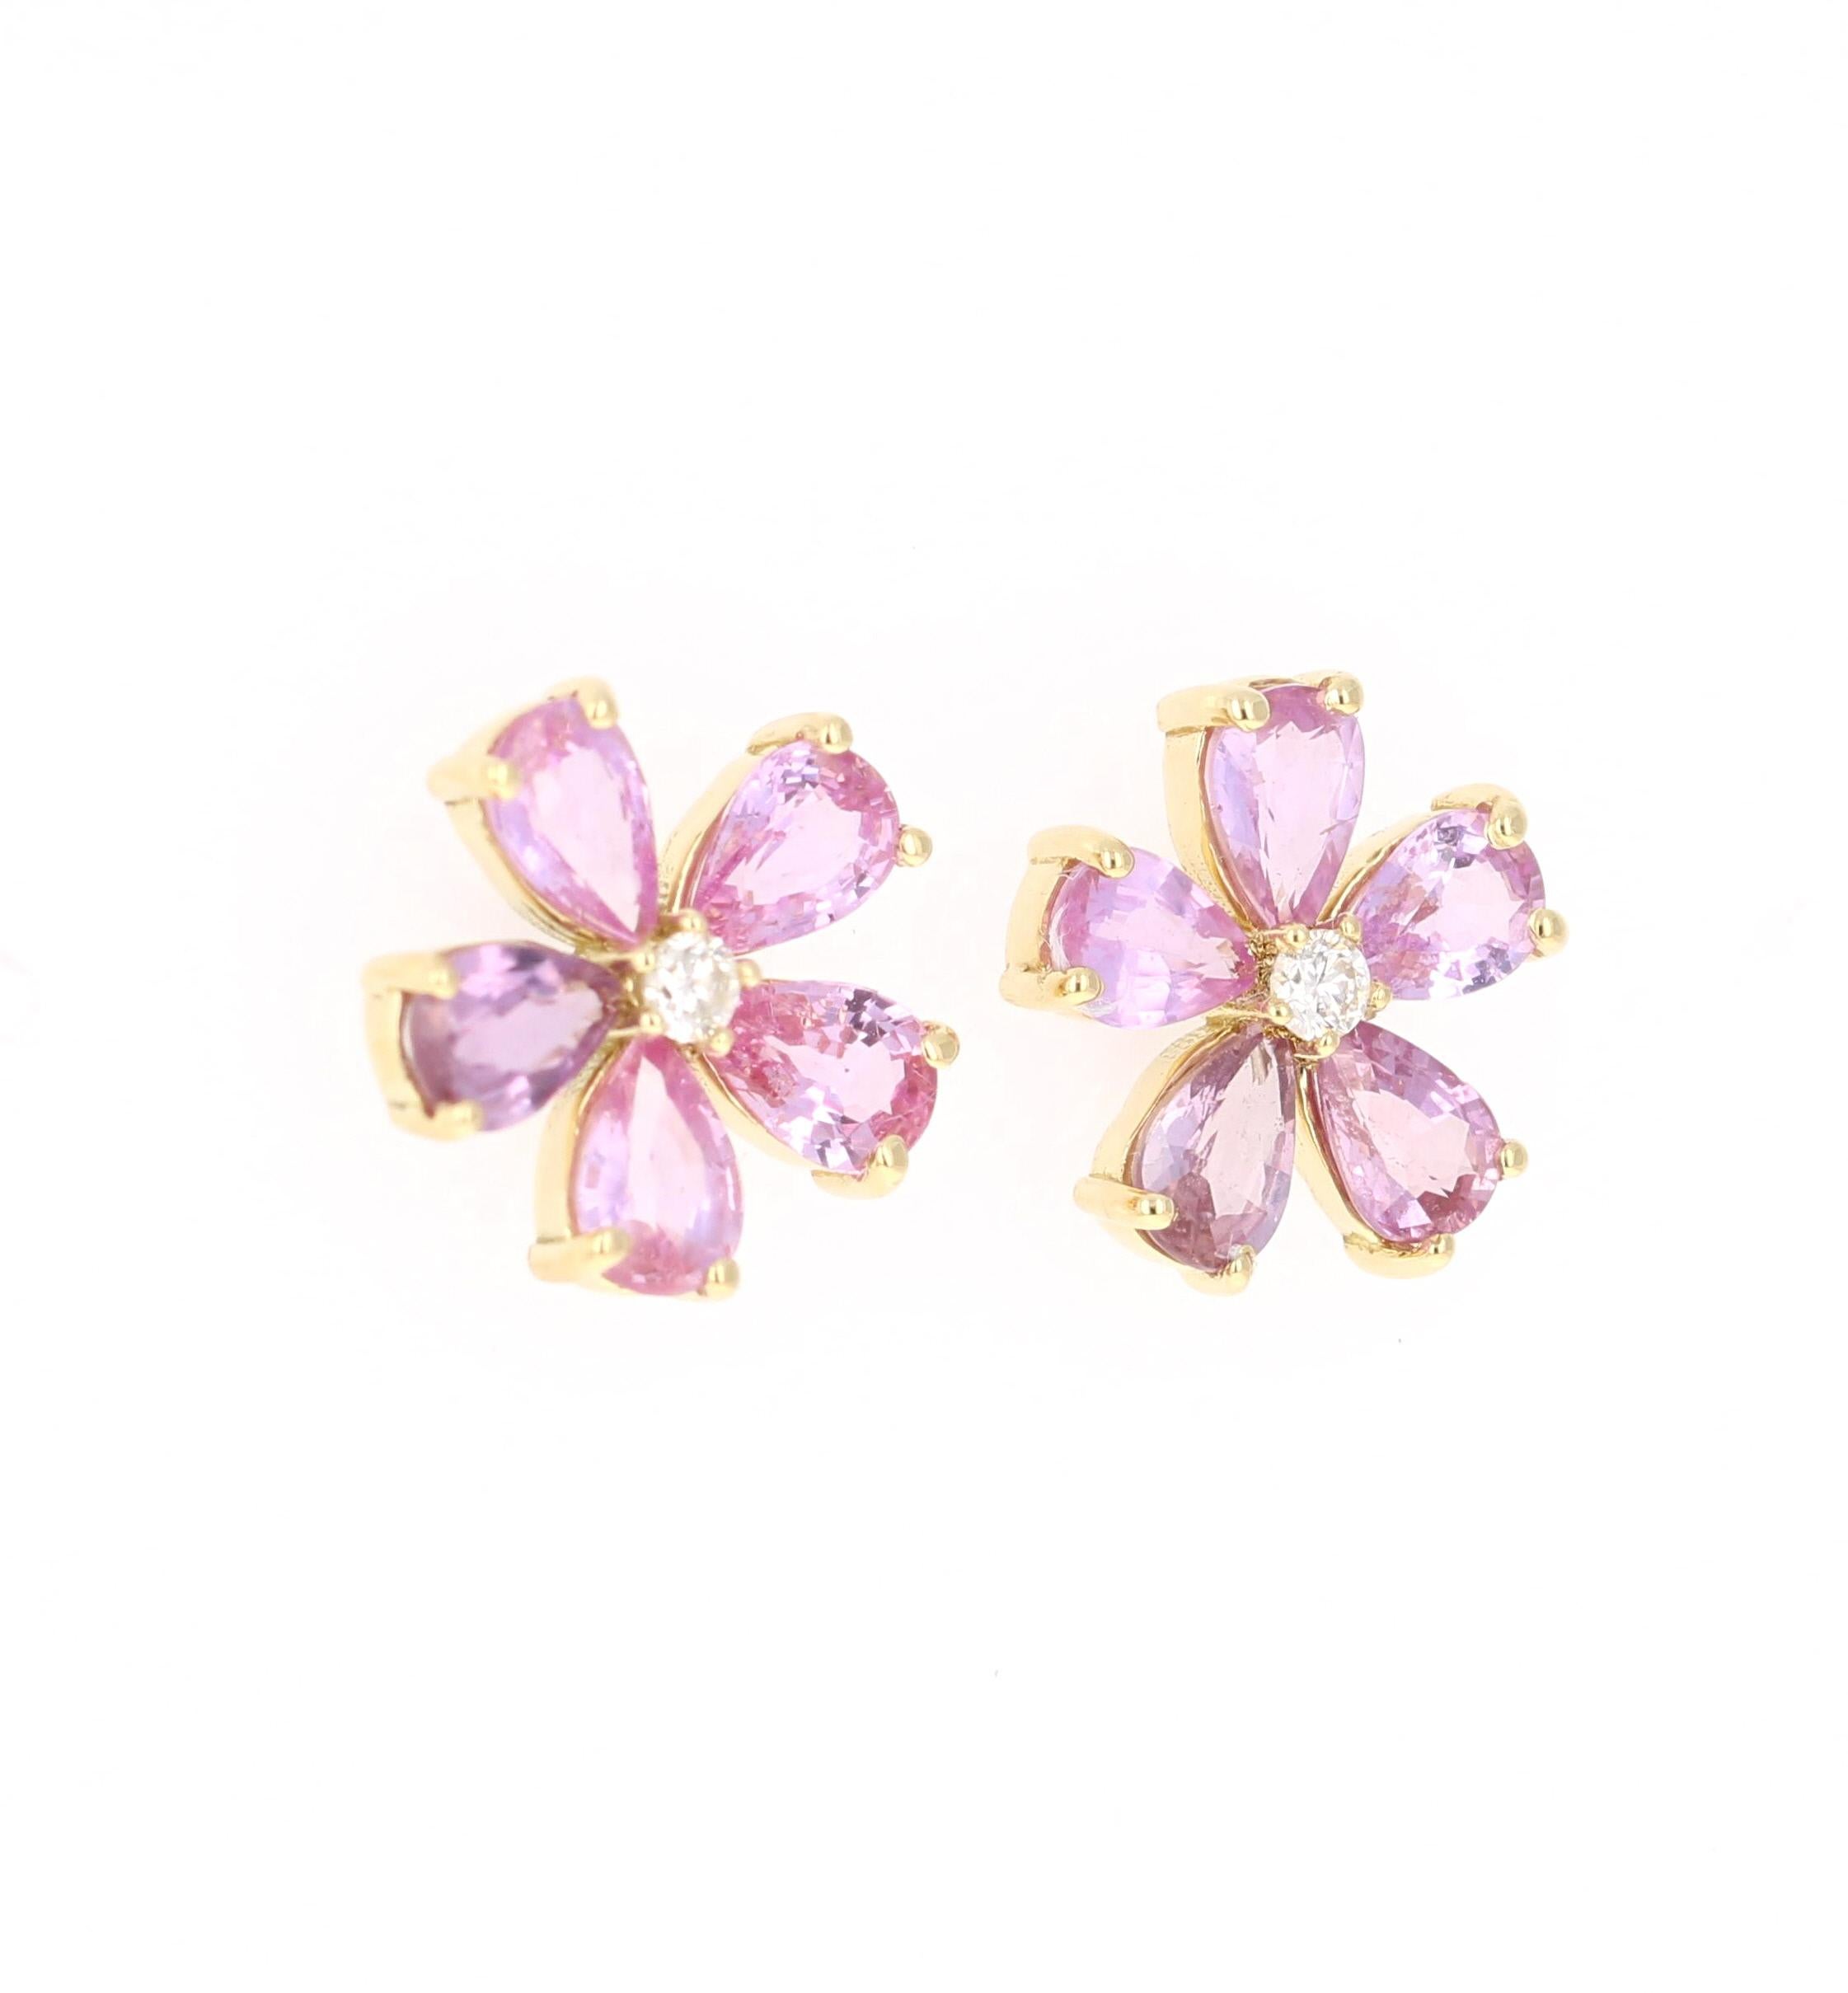 Simply Gorgeous Sapphire Earrings with beautiful hues of Pink and Purple. 

These beauties will pair wonderfully for any occasion! Even as a daily and classy addition to your collection. 

There are 10 Natural Pear Cut Sapphires that weigh a total